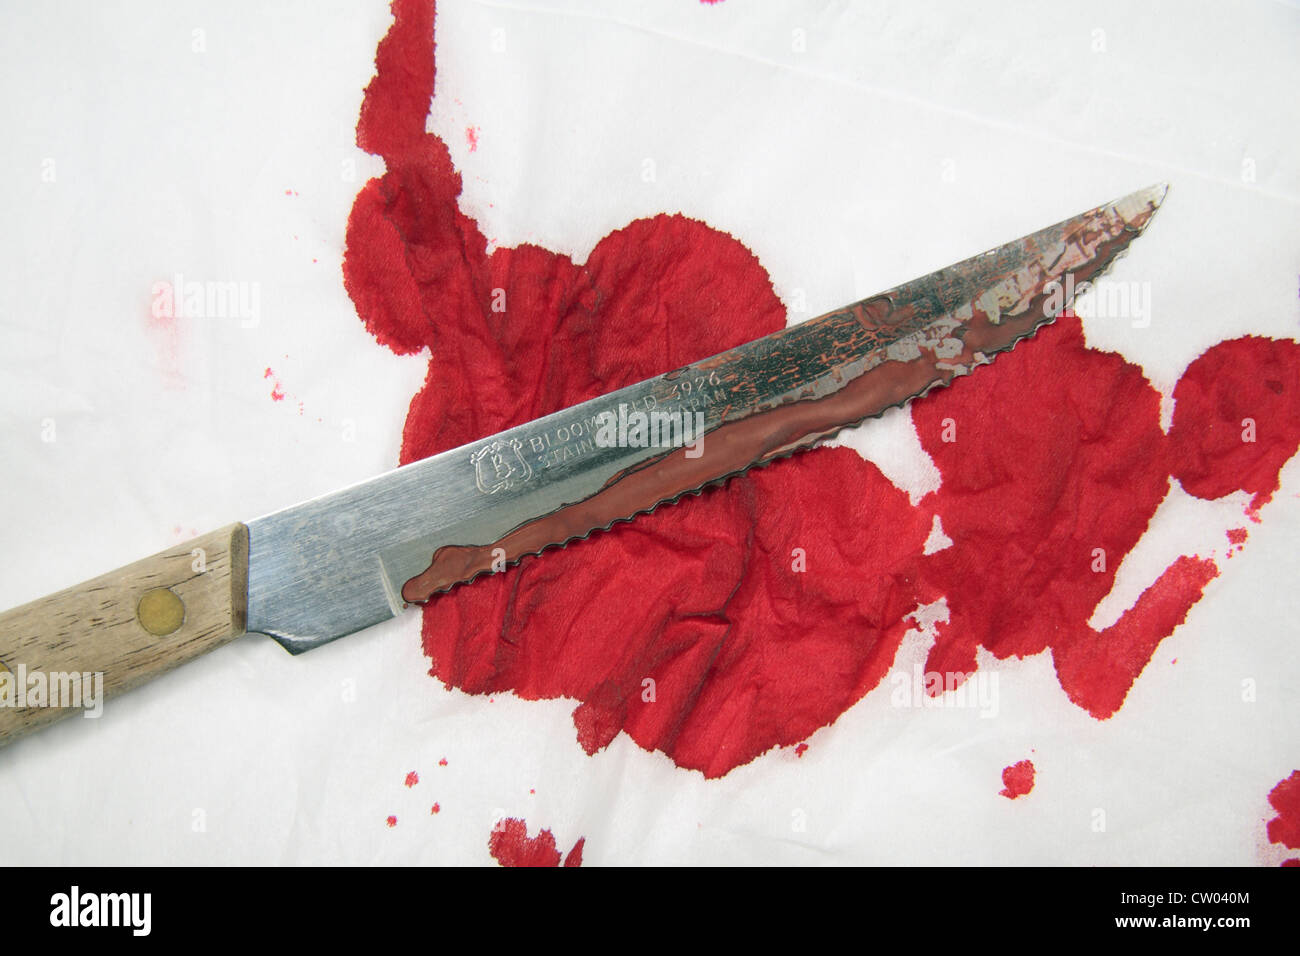 A simulated serrated edged bloodied knife on a simulated blood covered white cloth. Stock Photo